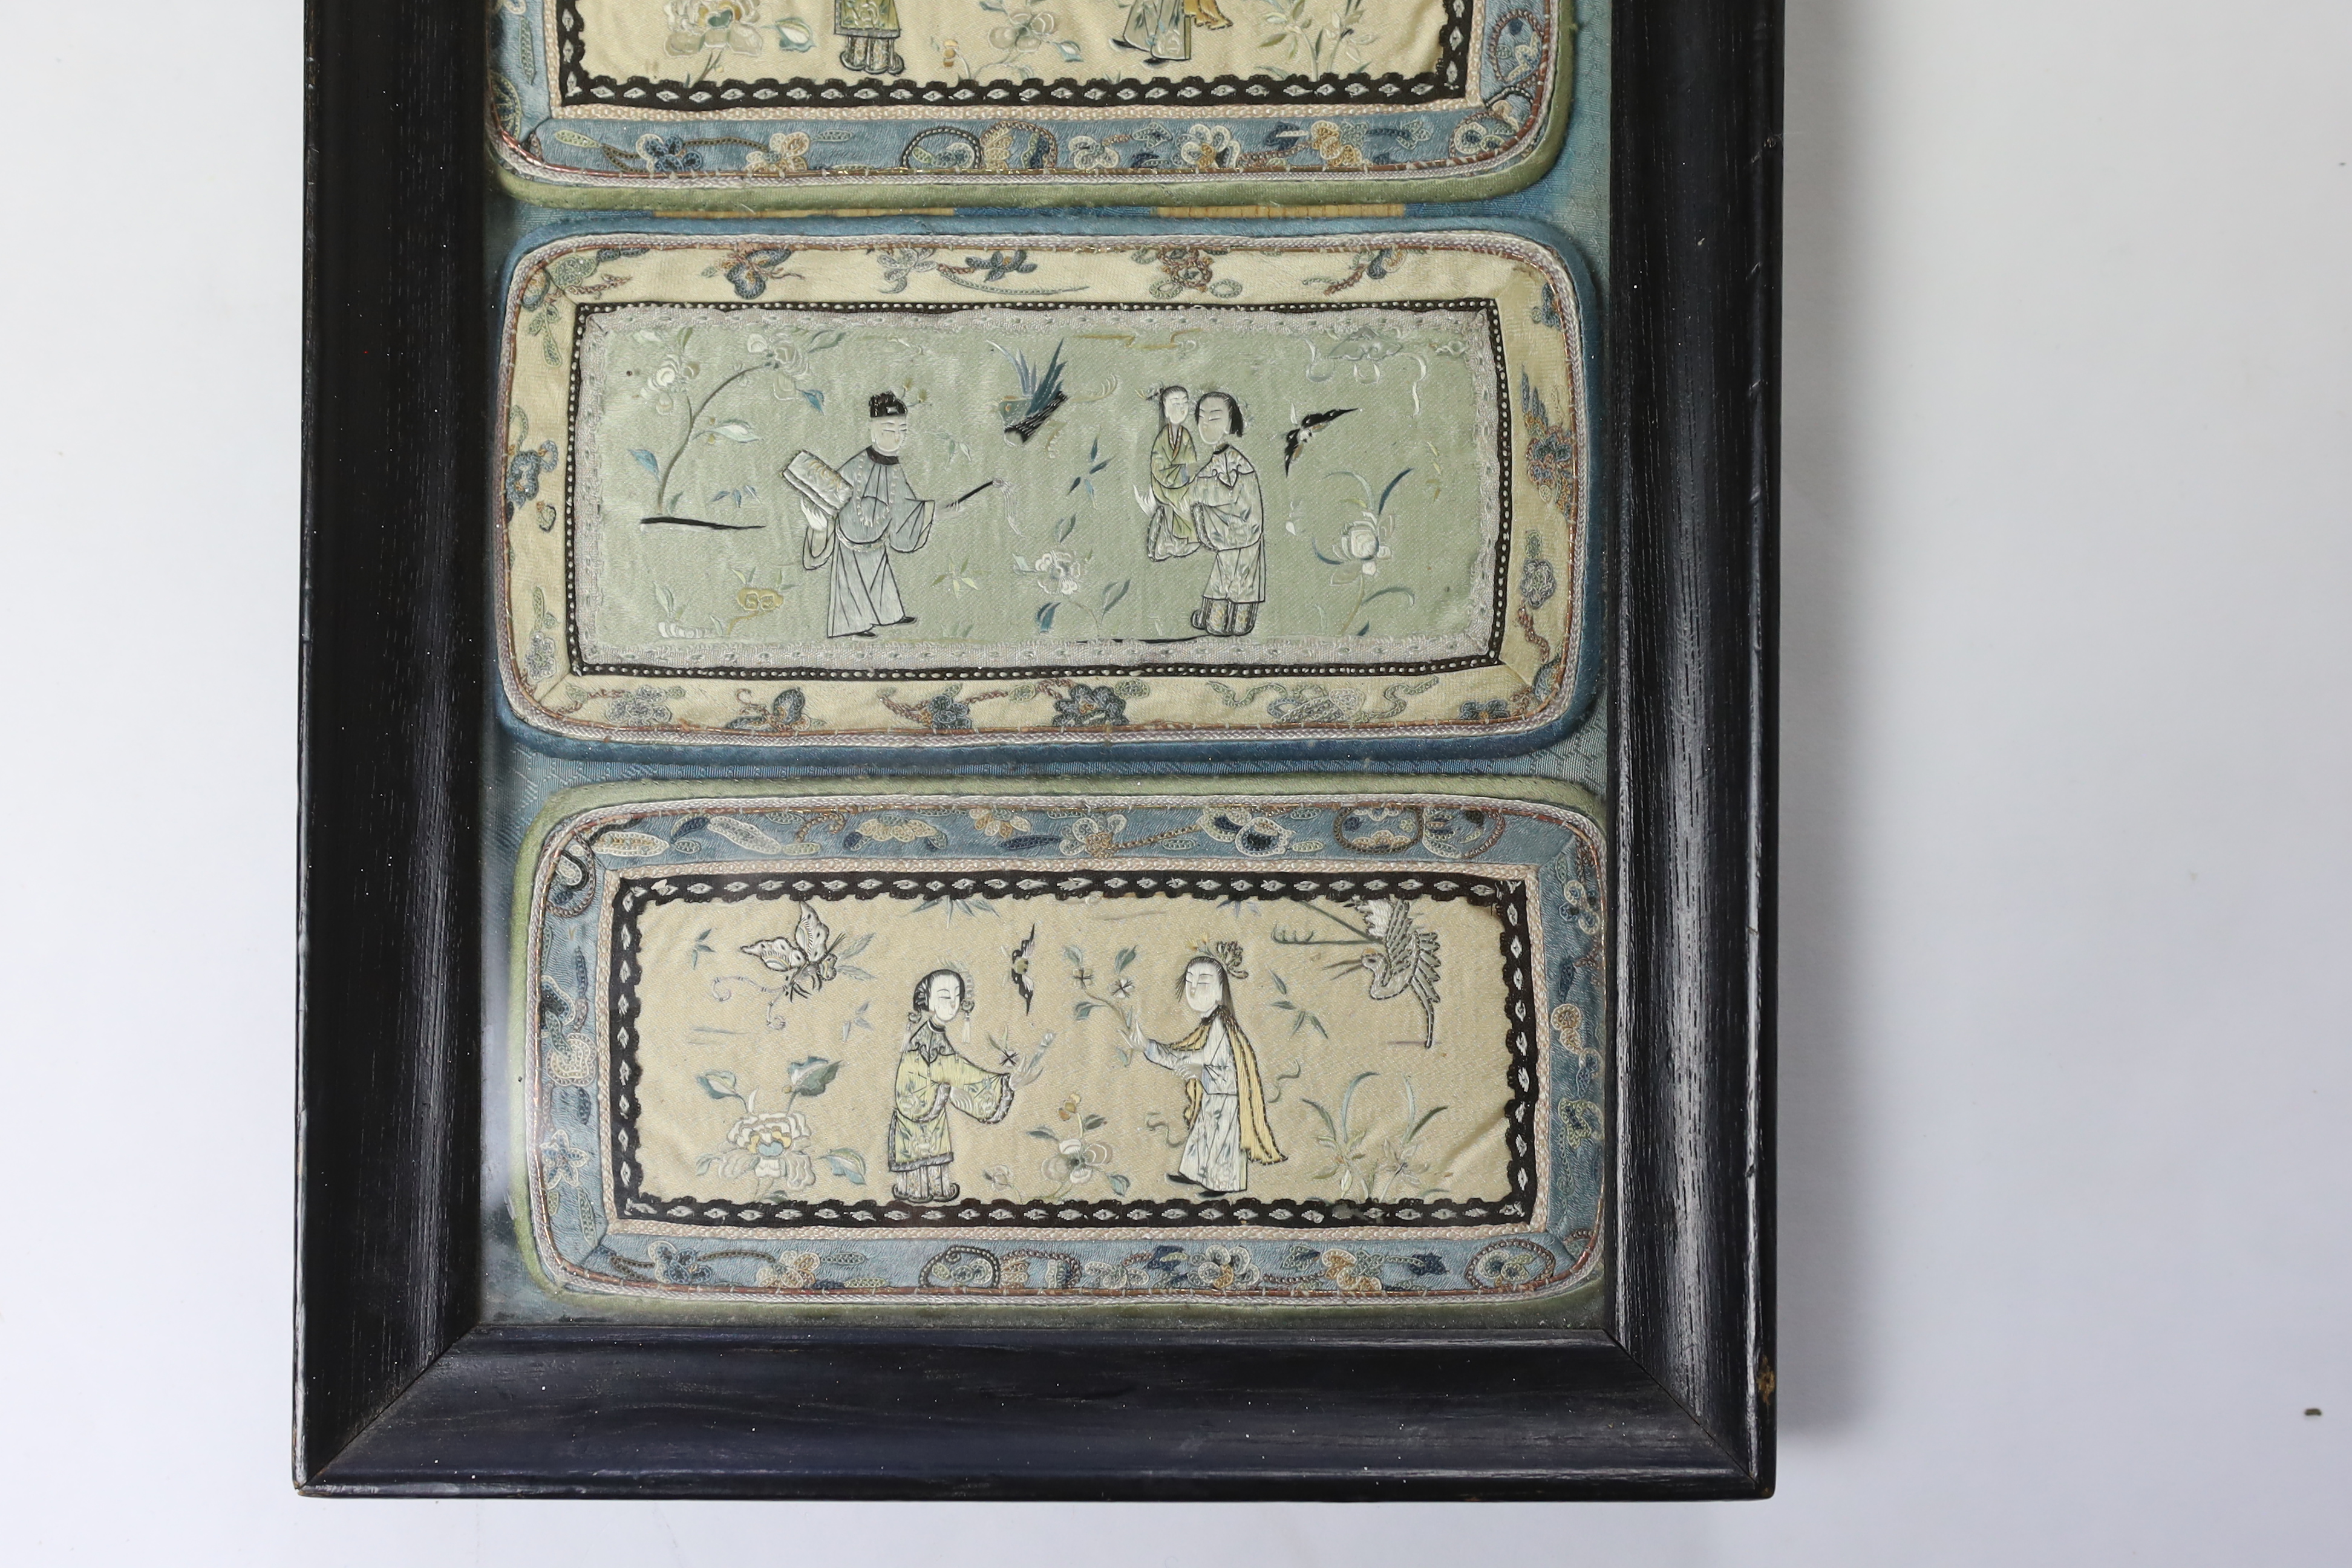 Two pairs of Chinese silk figurative embroidered panels (framed together), being the front and back panels of two spectacle cases, embroidered with very fine embroidery, using Chinese knot in the borders, 15.5cm wide x 3